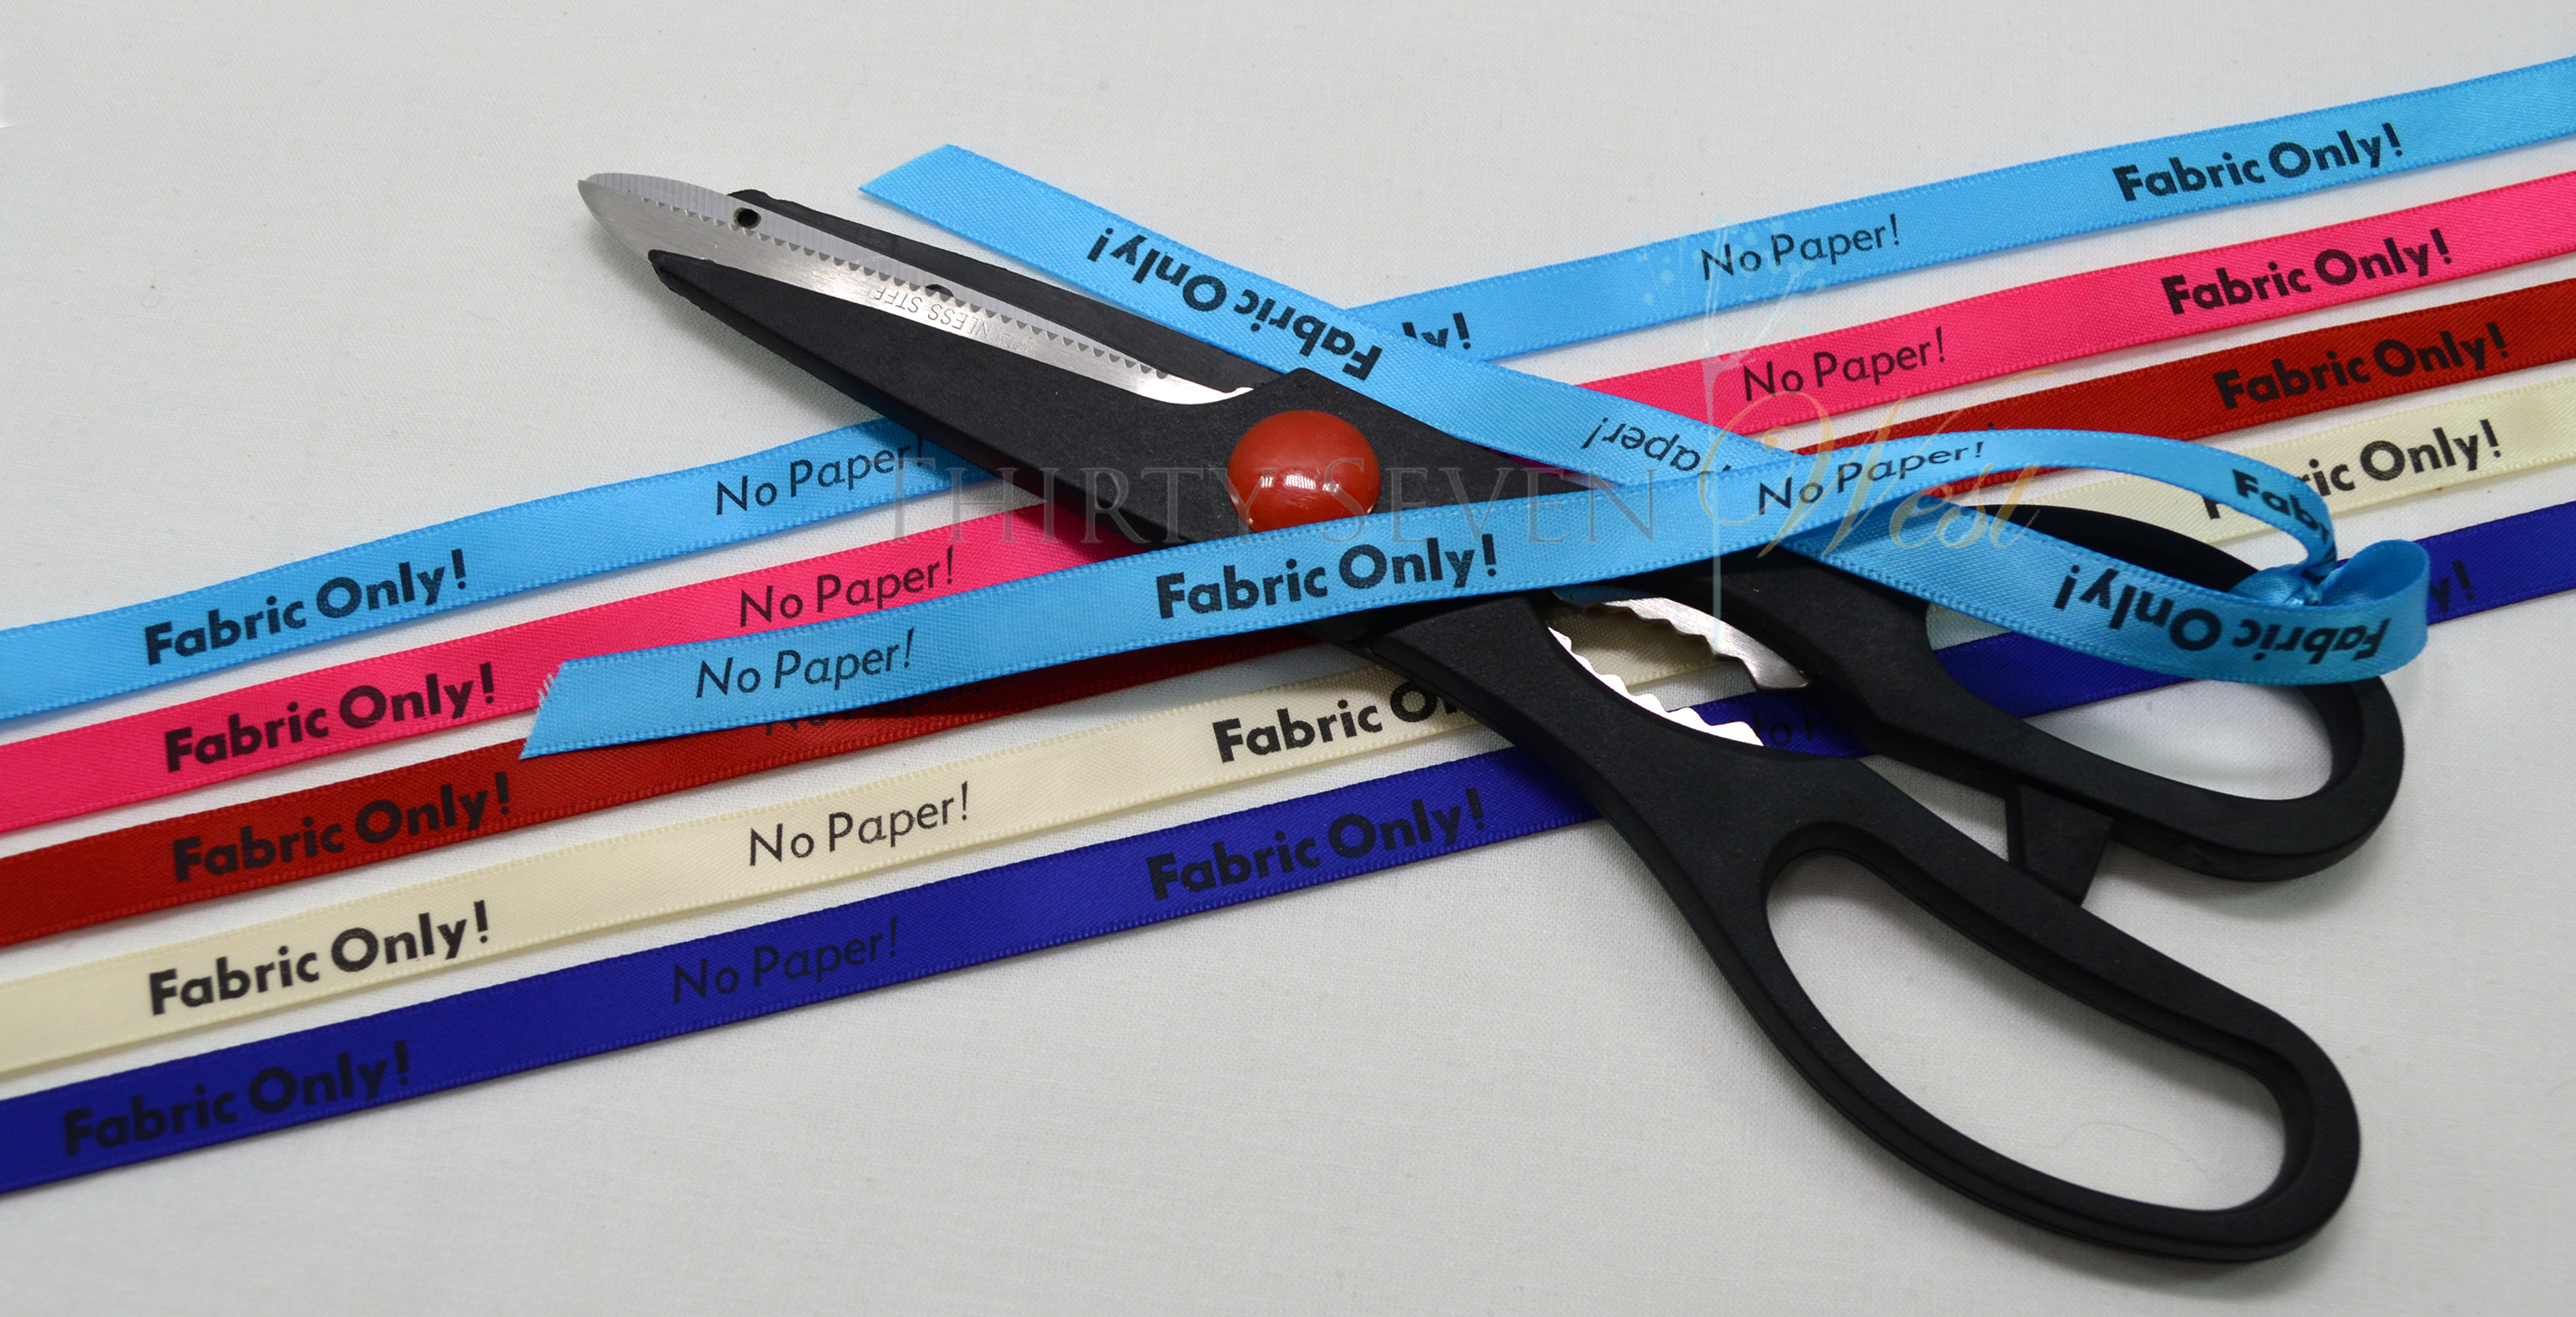 Fabric Only! No Paper! Scissor Ribbon to Protect your Sewing Scissors